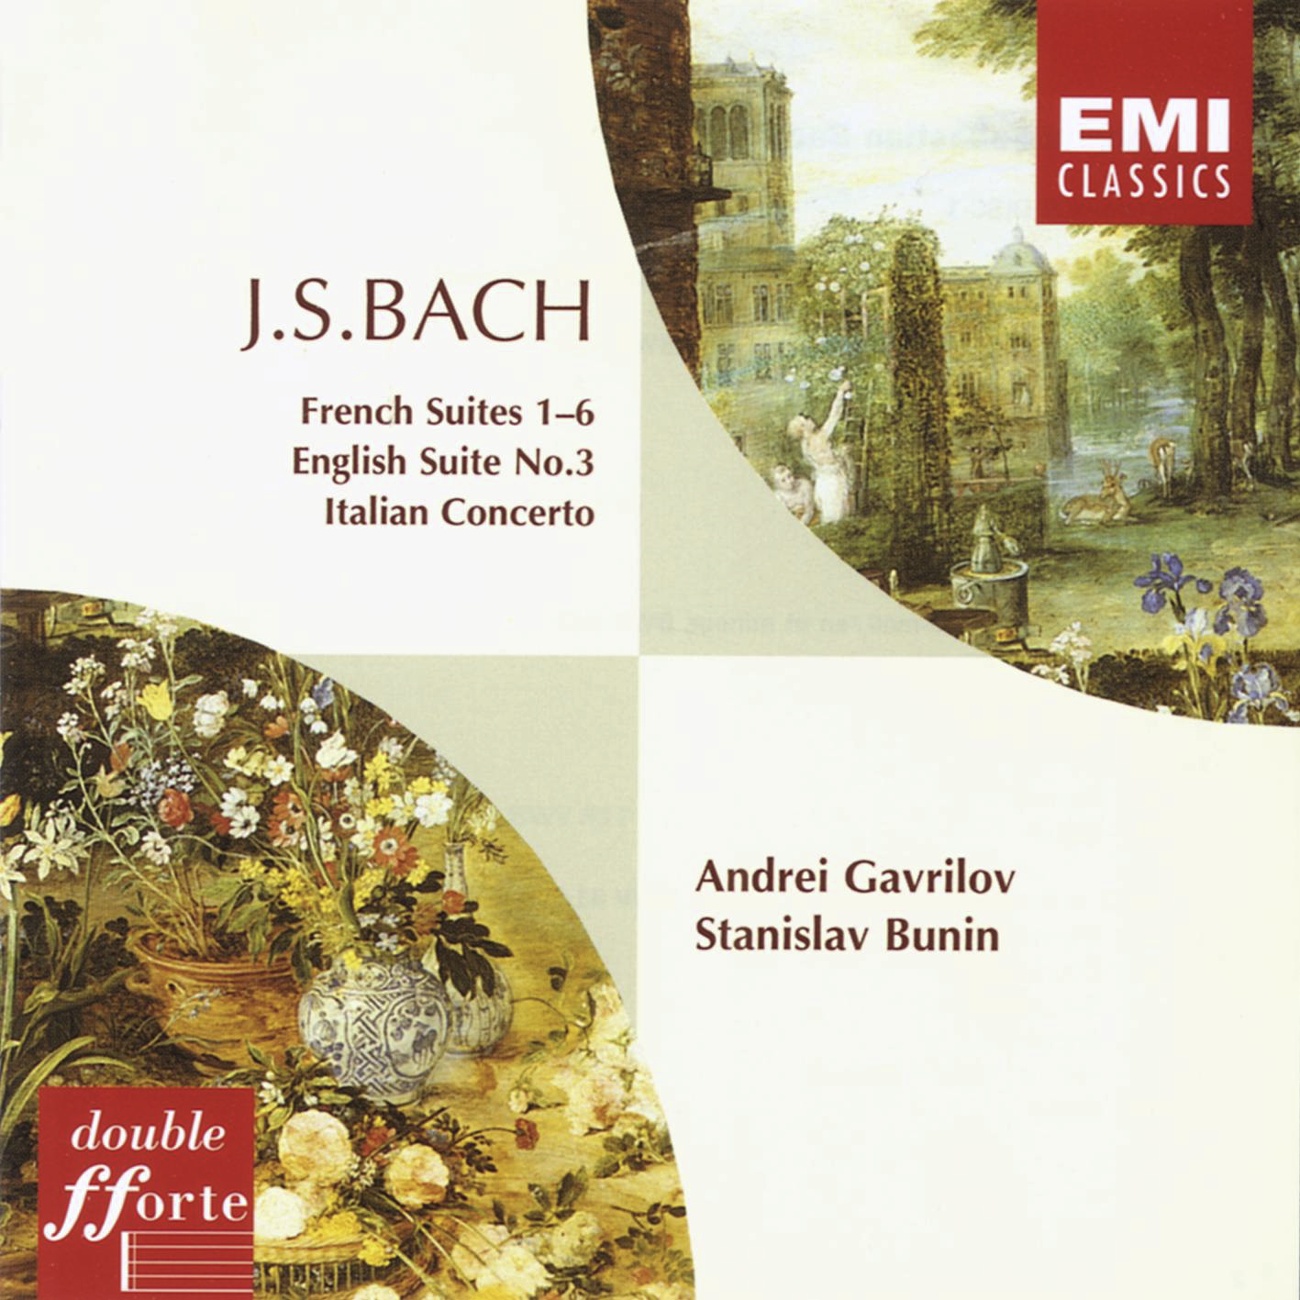 FRENCH SUITE 2 IN C-MIN, BWV 813:III. SARABANDE